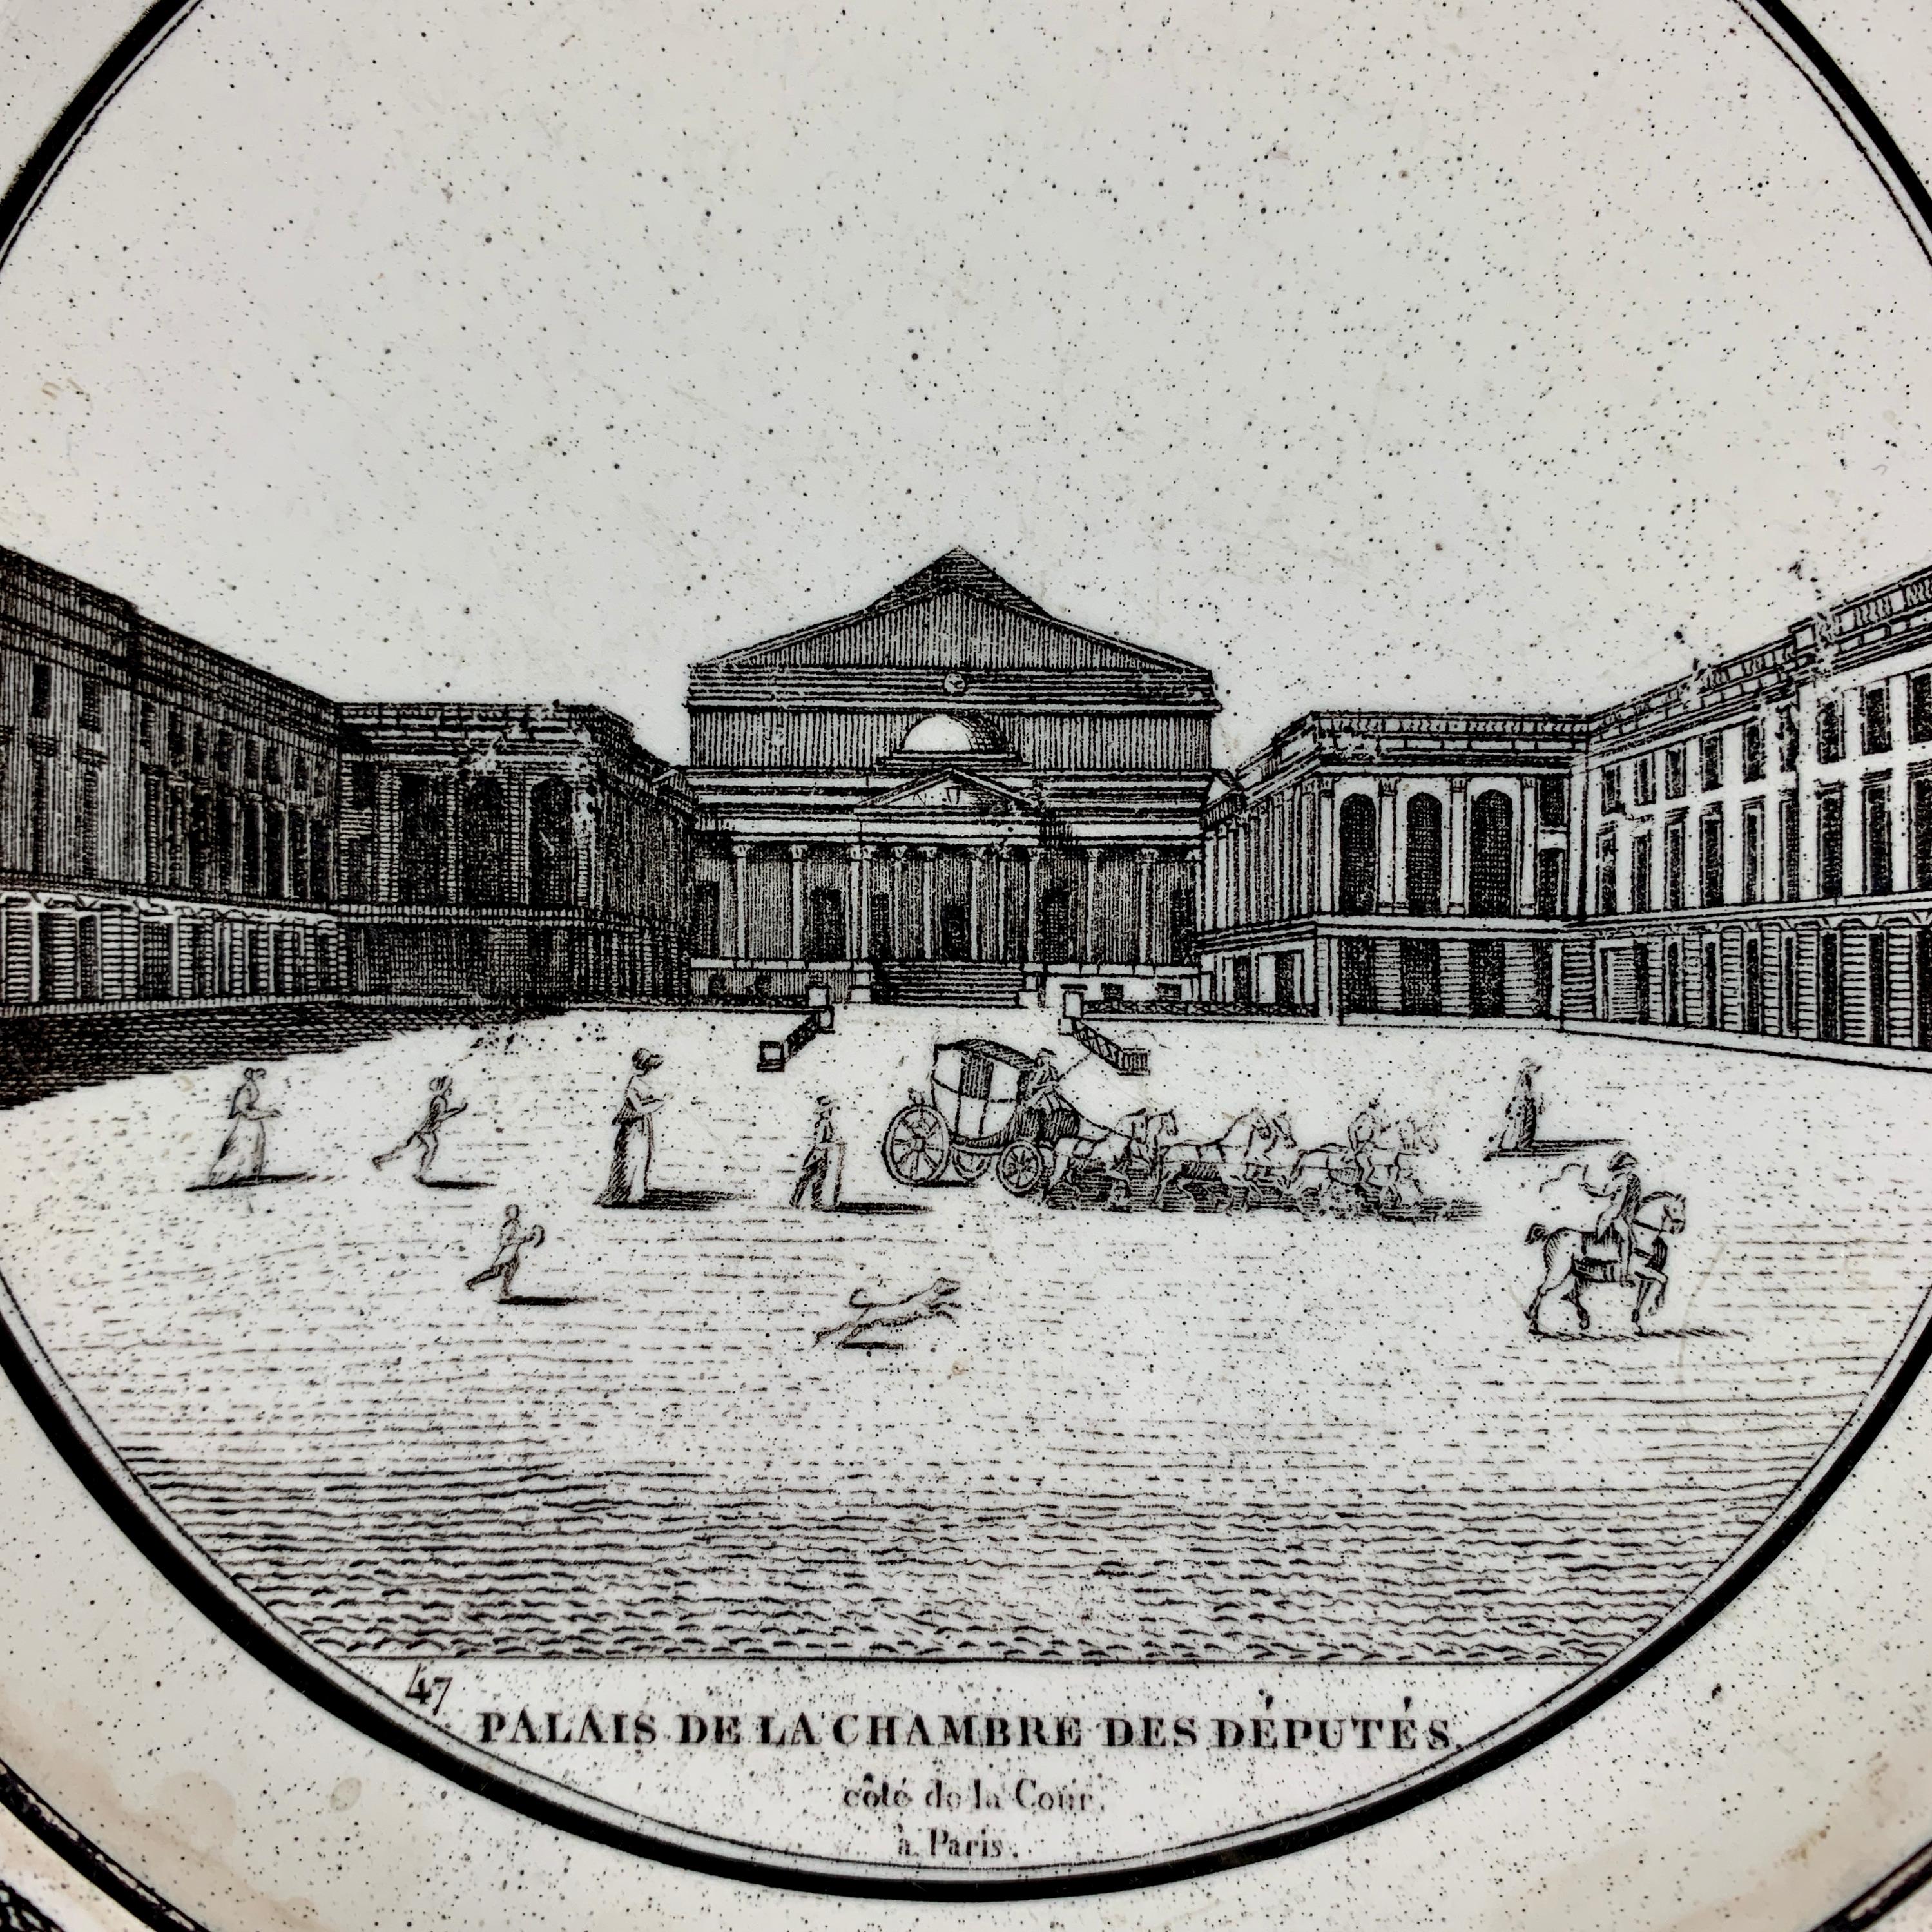 A French neoclassical faïence transfer printed creamware plate, circa 1820-1830.

A black transfer of an architectural image on a creamware body, depicting the Palais de la Chambre des Deputés à Paris. The building is prominent, with figures in